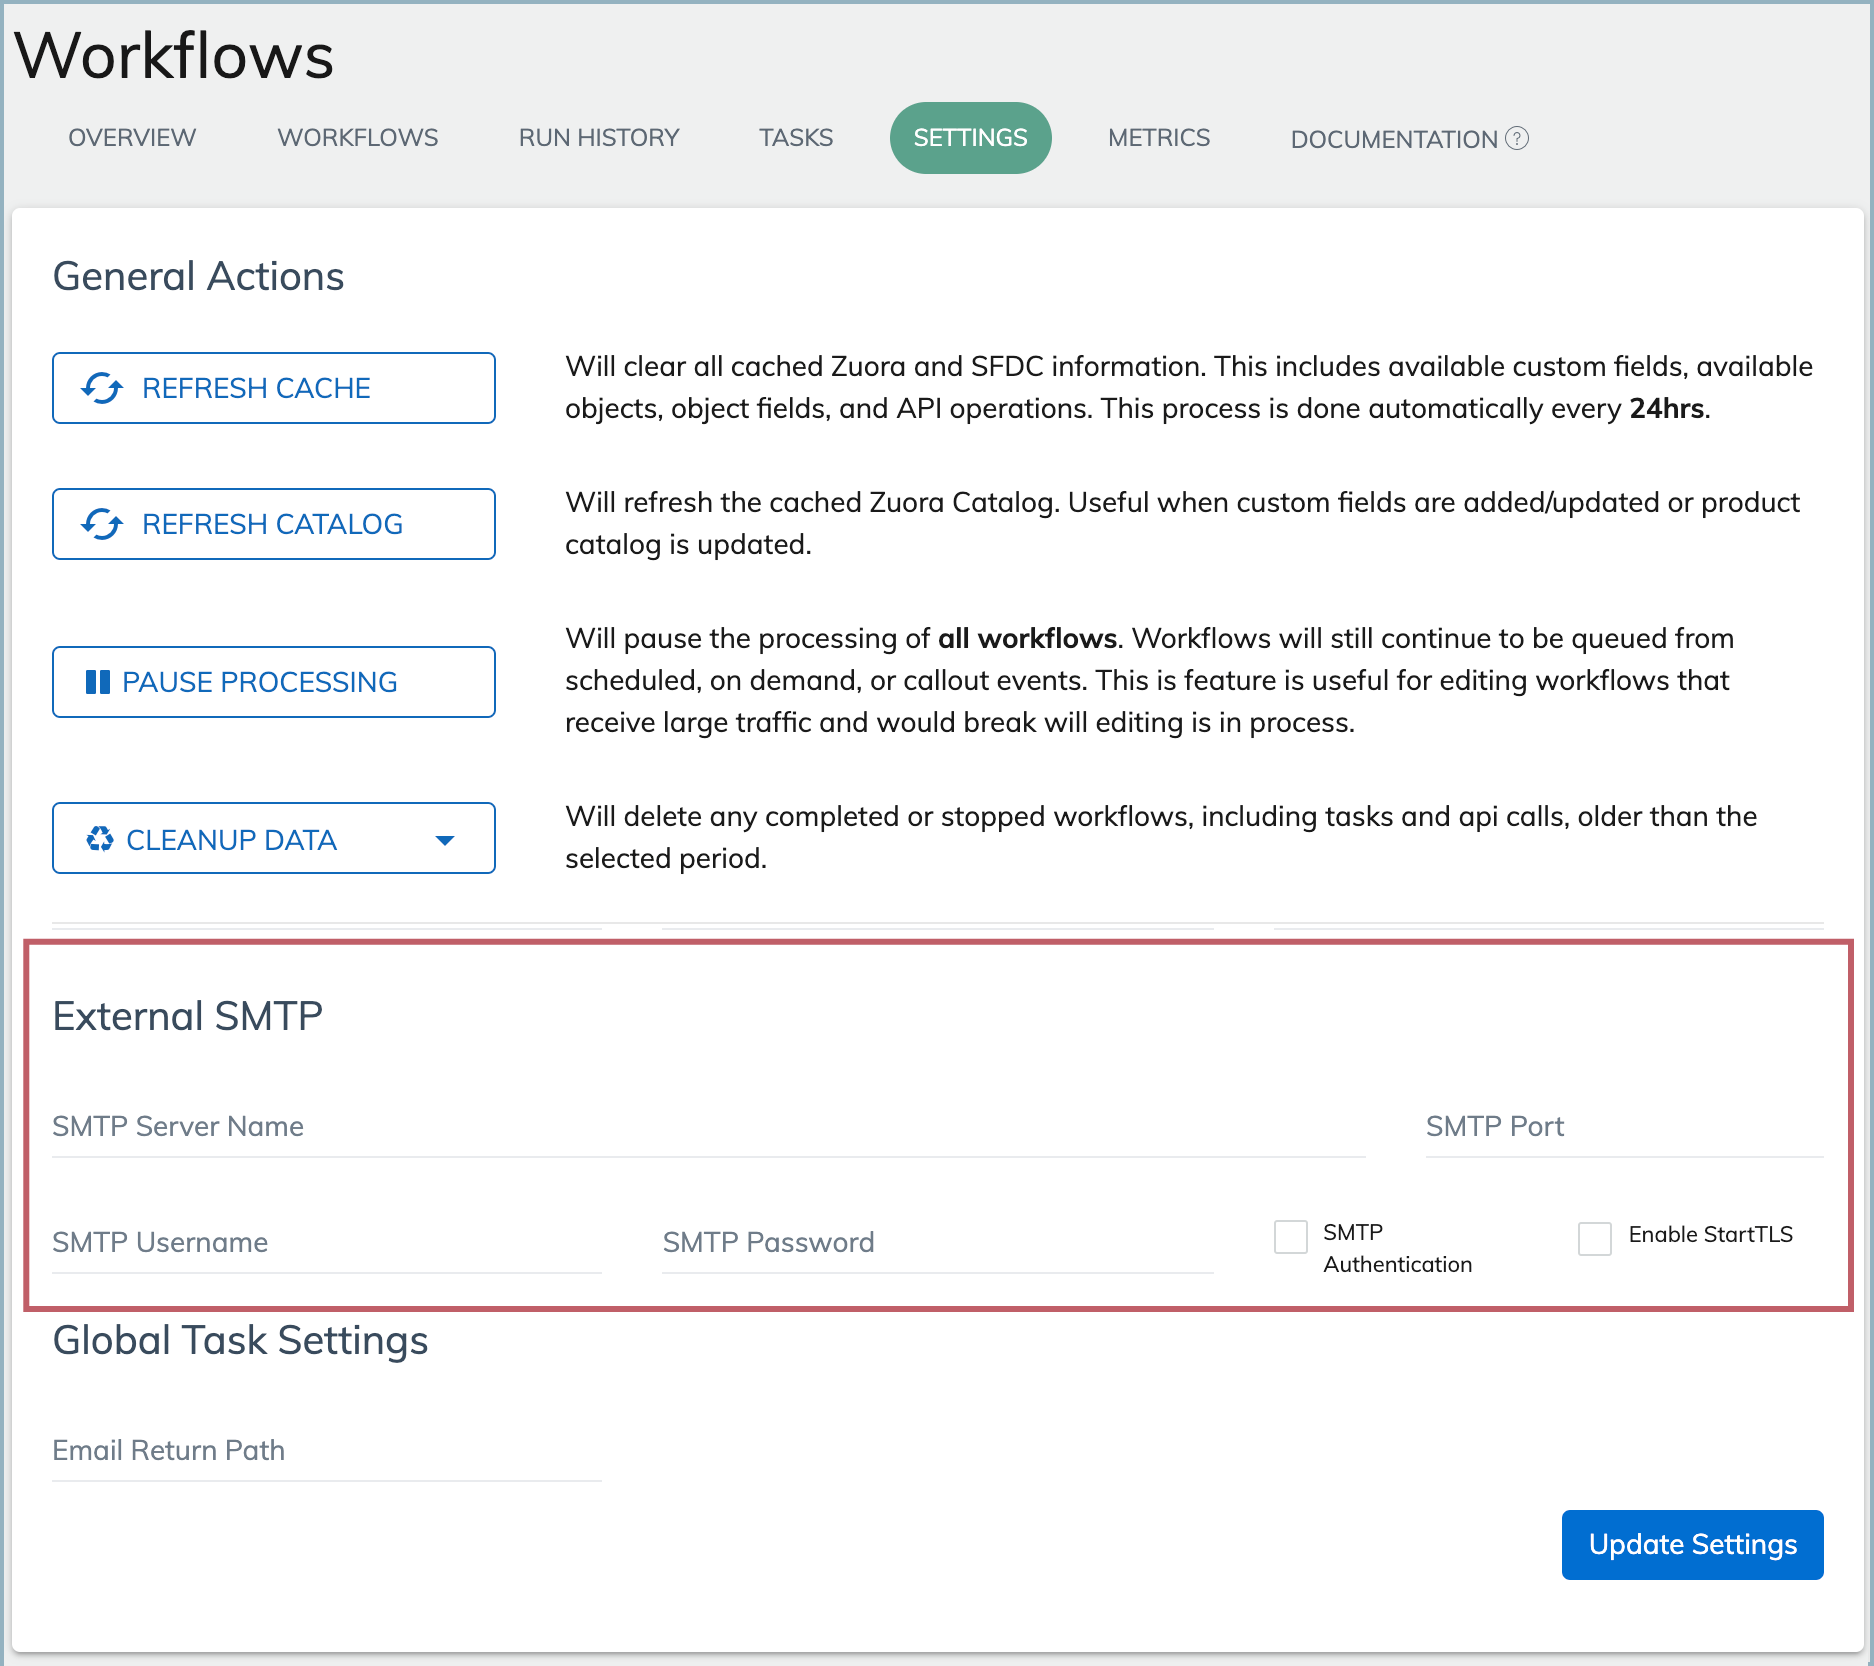 workflow_global_settings_smtp.png